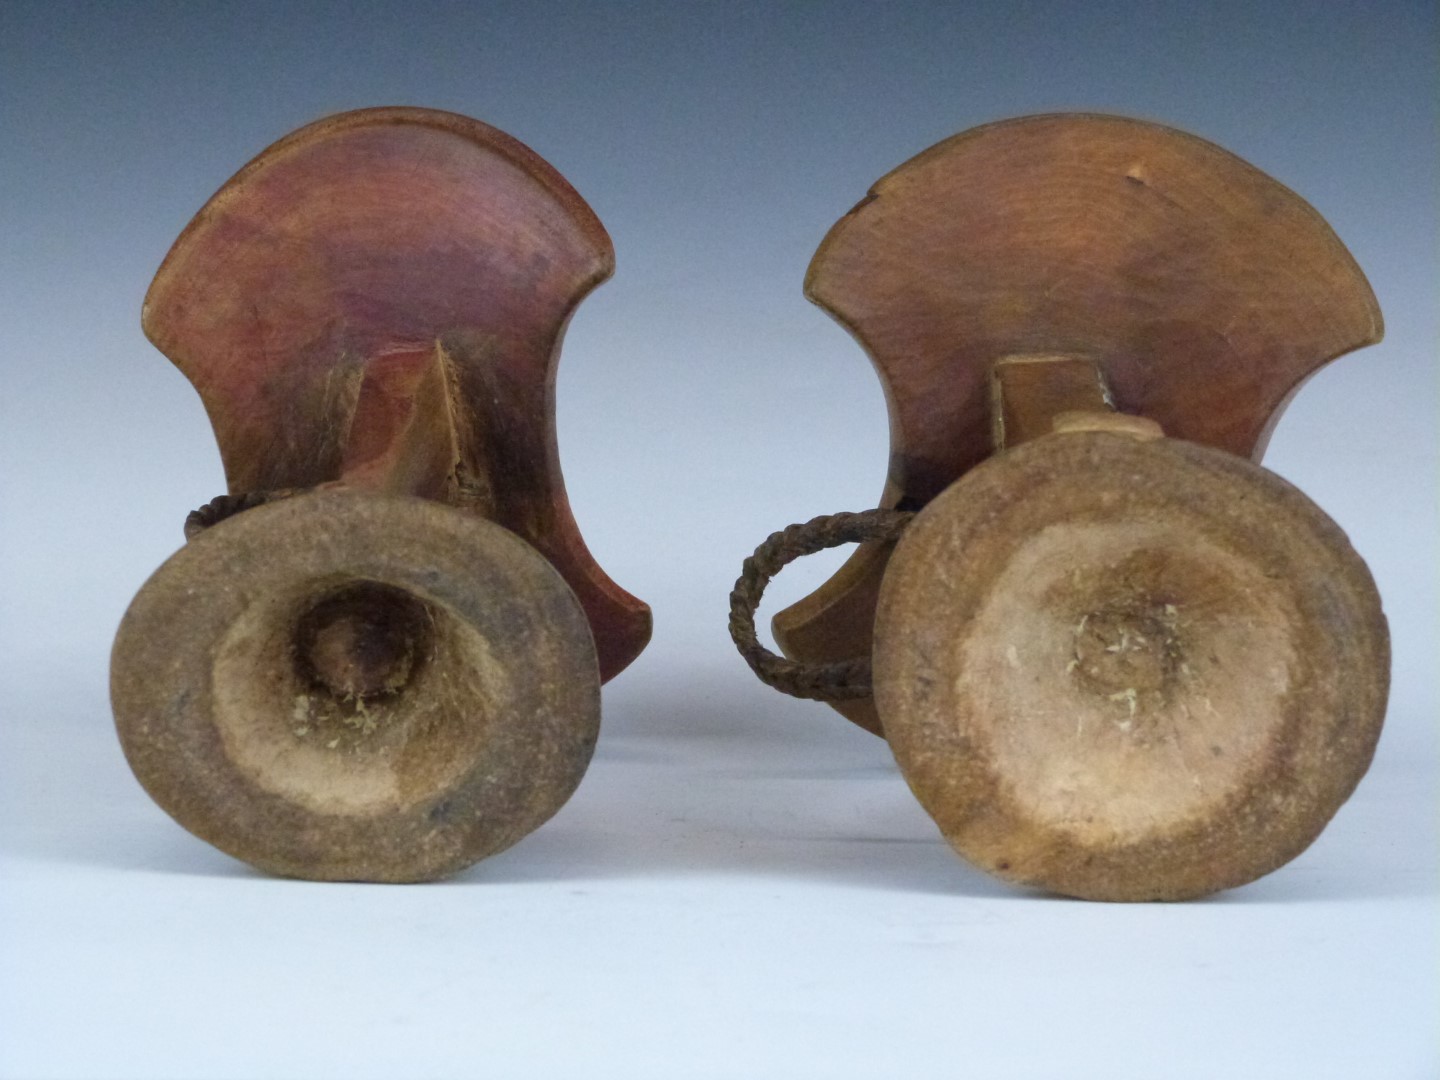 Two carved African tribal headrests with braided leather handles, Ileret, Latee Turkana region, - Image 4 of 4